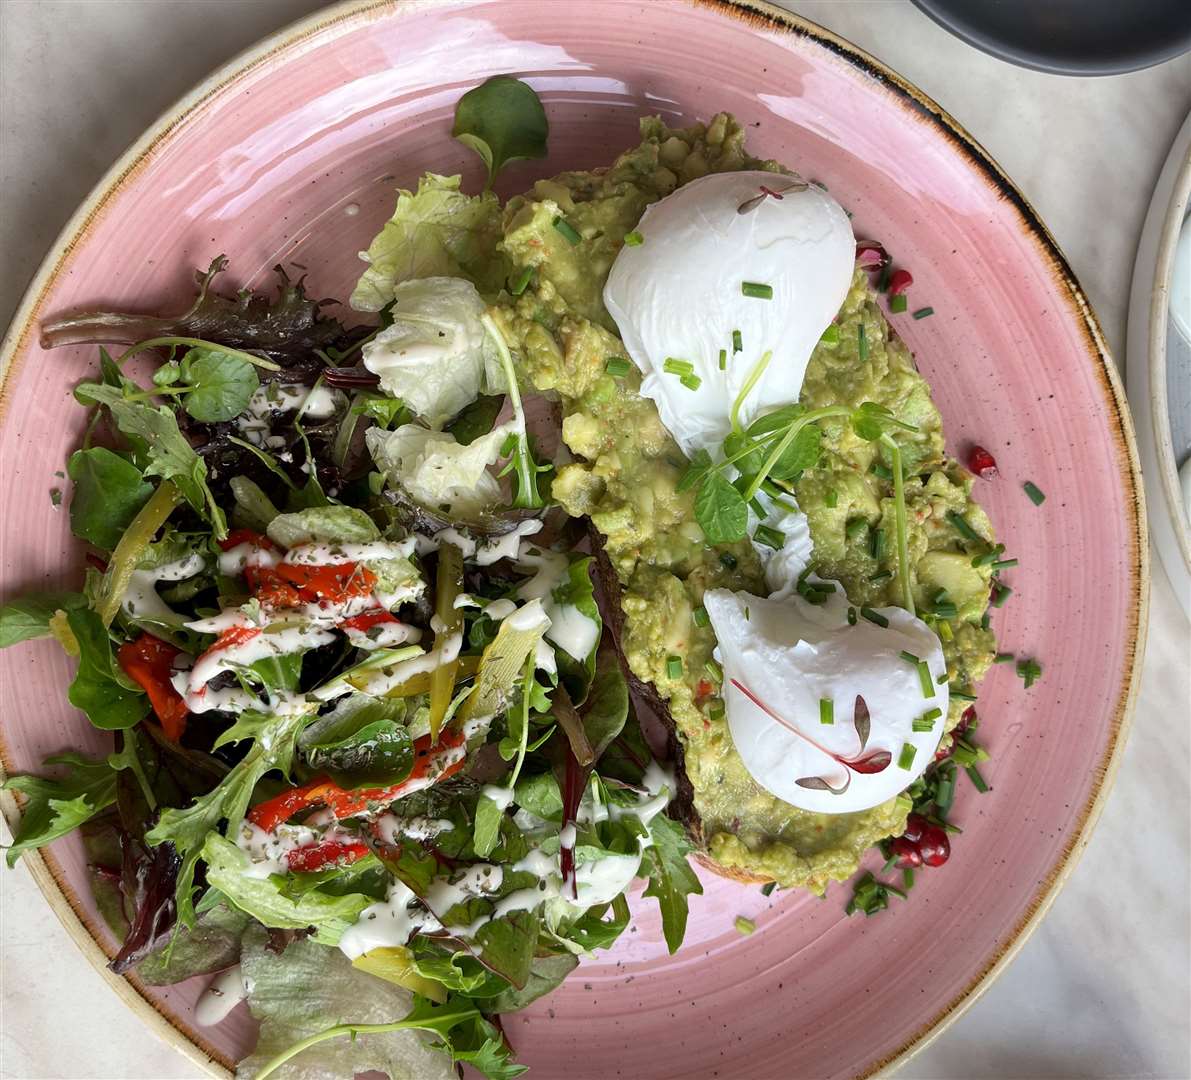 I opted for the ‘Avocholic’ which was smashed avocado on toast with poached eggs and a side salad